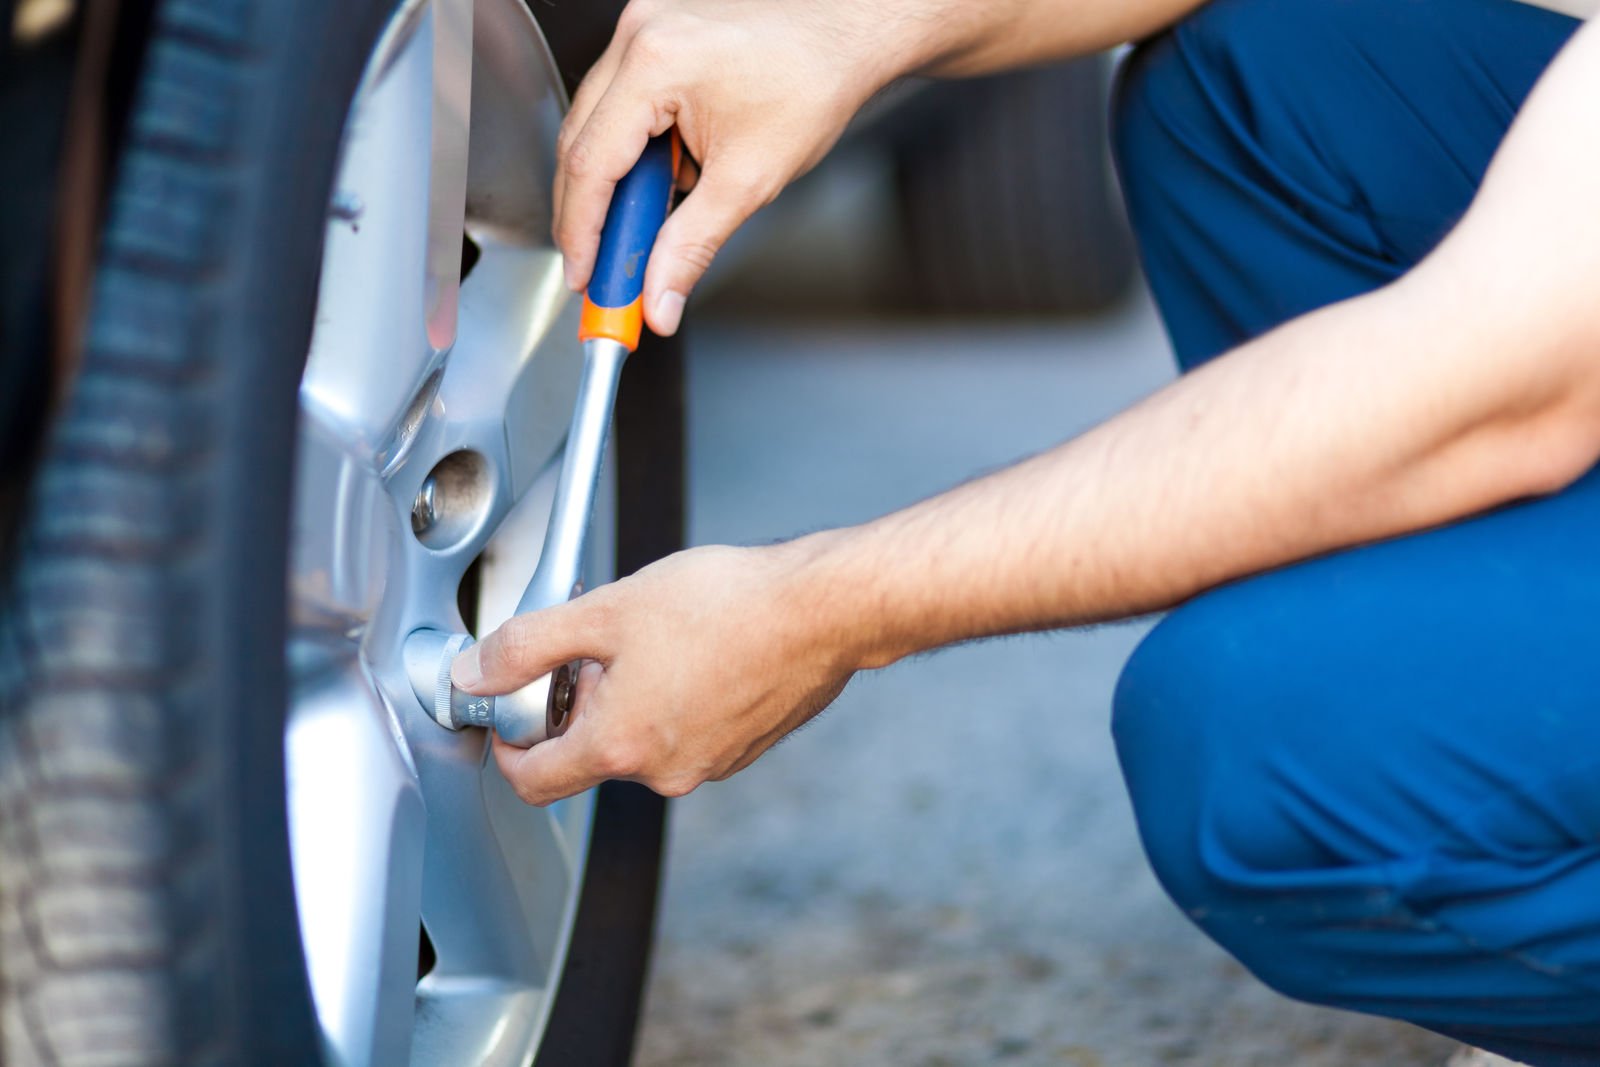 Does my car insurance cover flat tires?